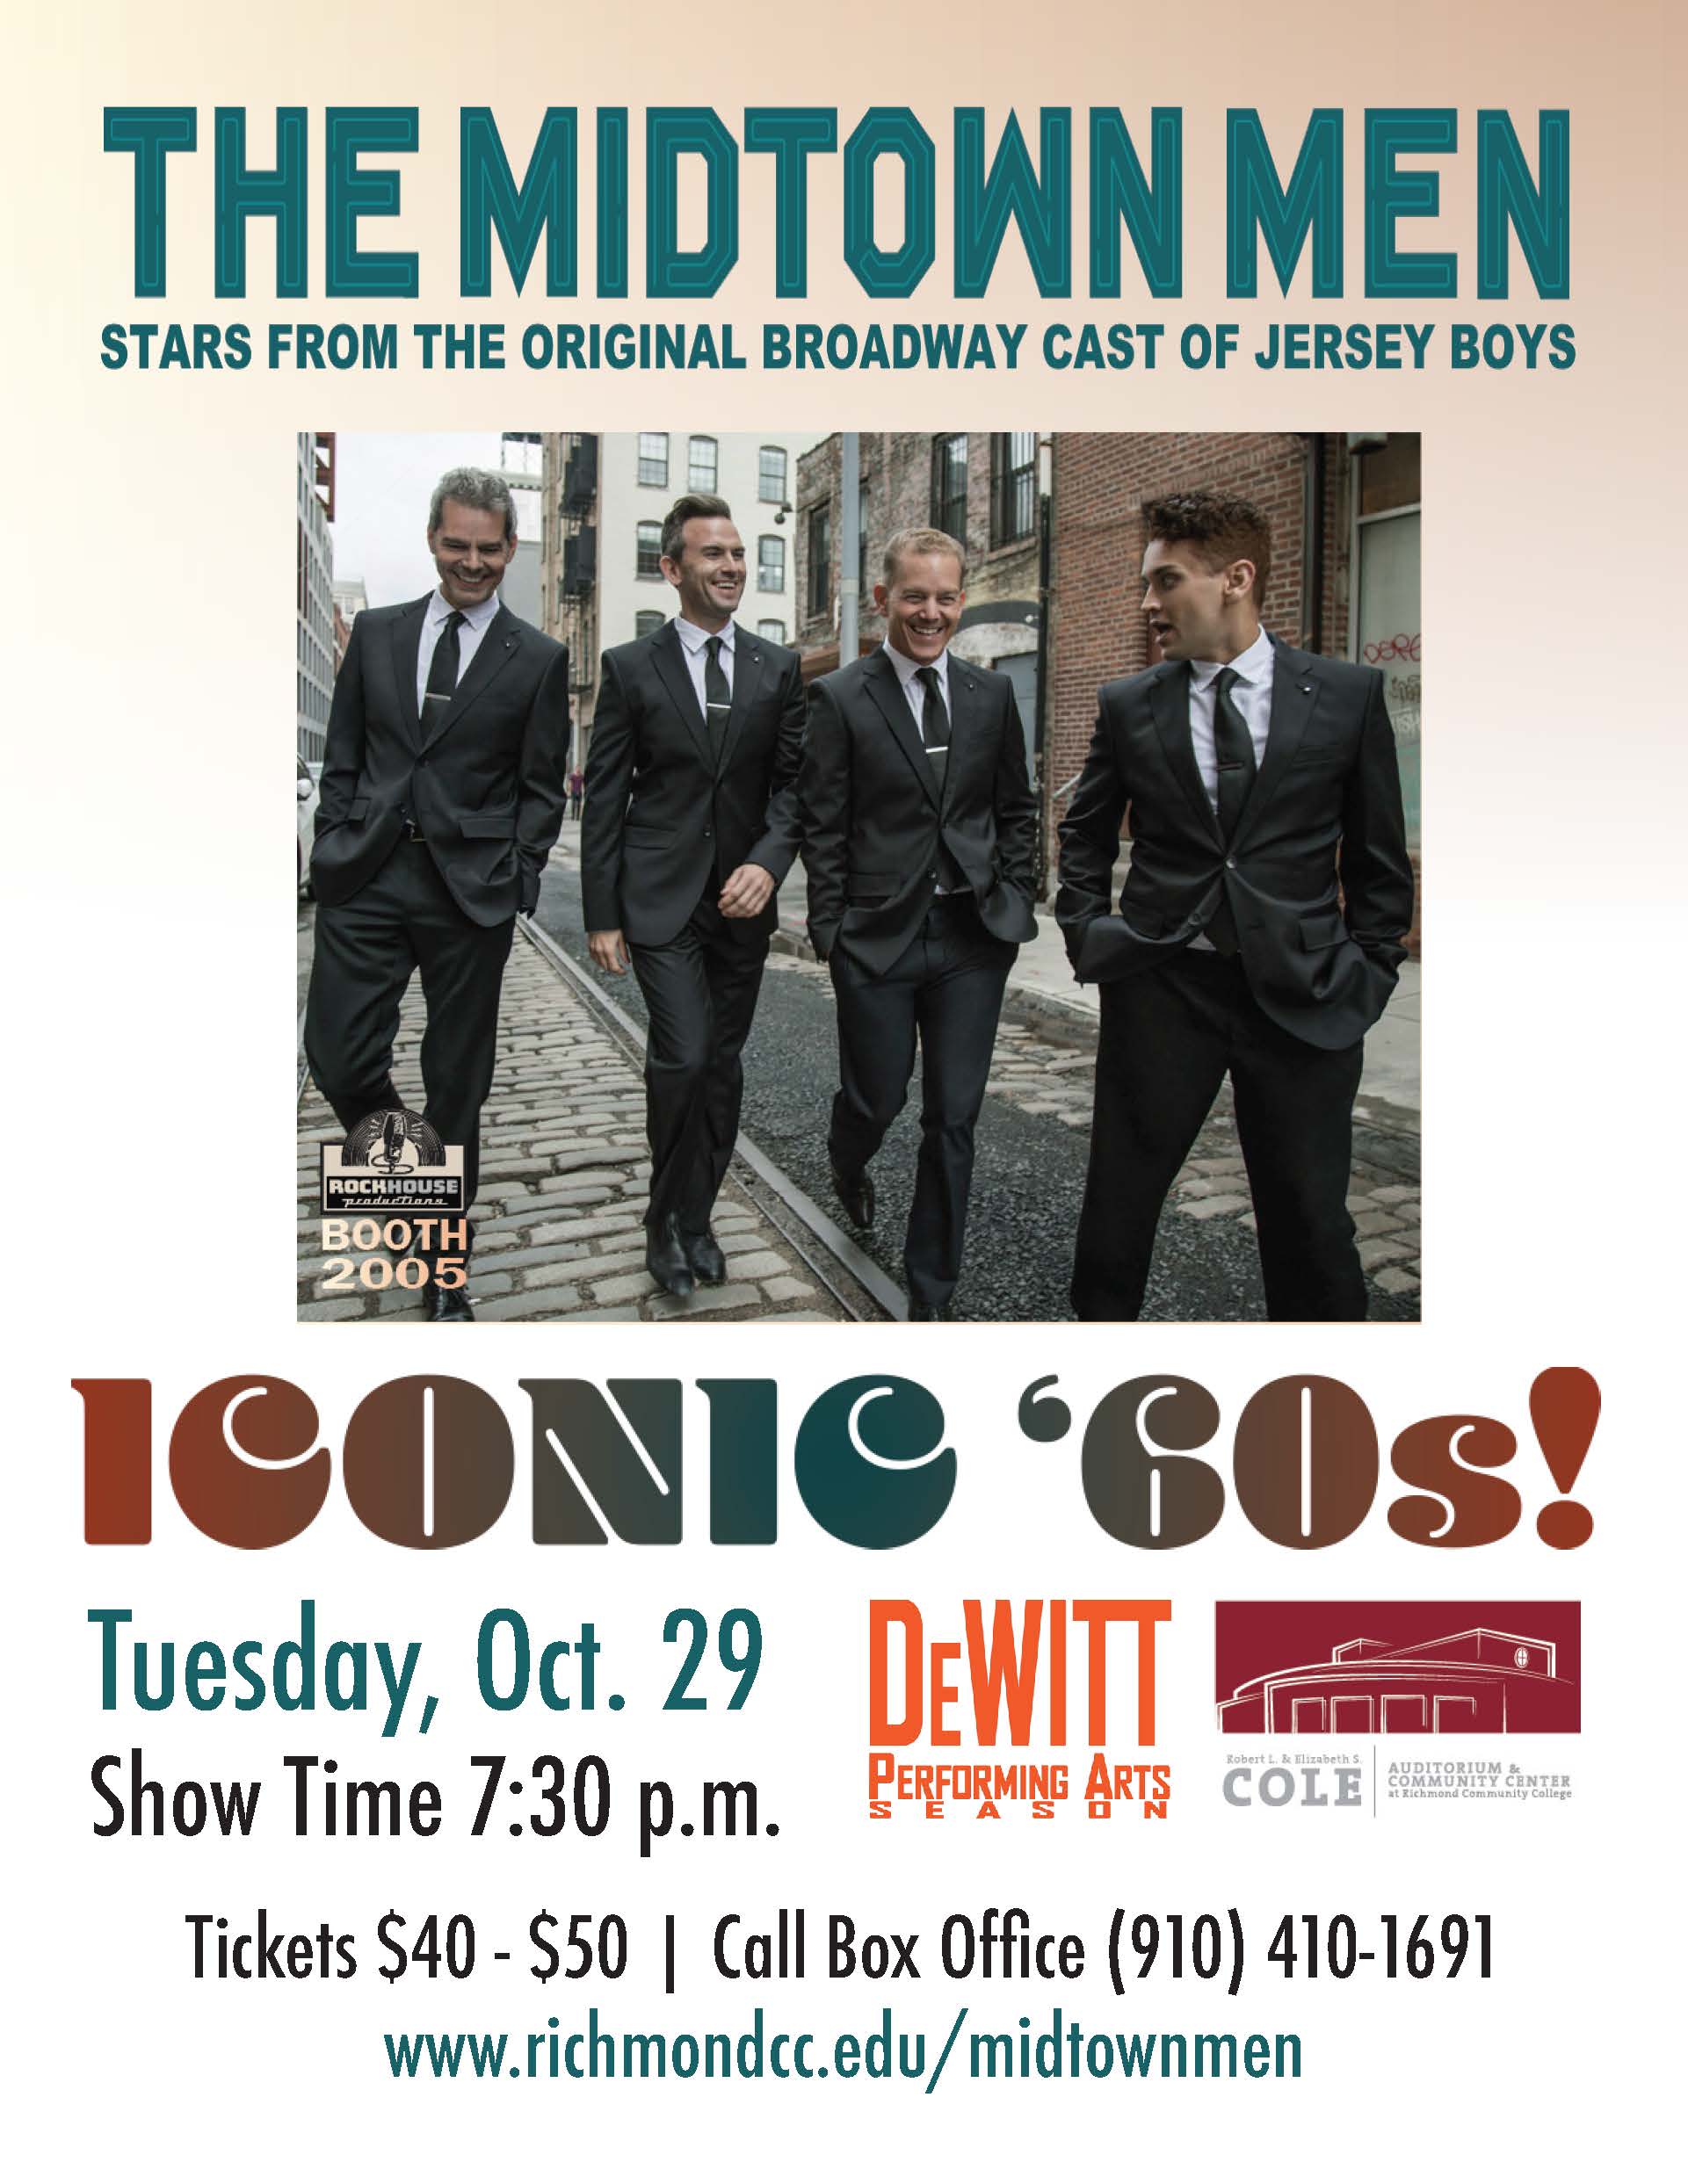 The Midtown Men show poster for Oct. 29